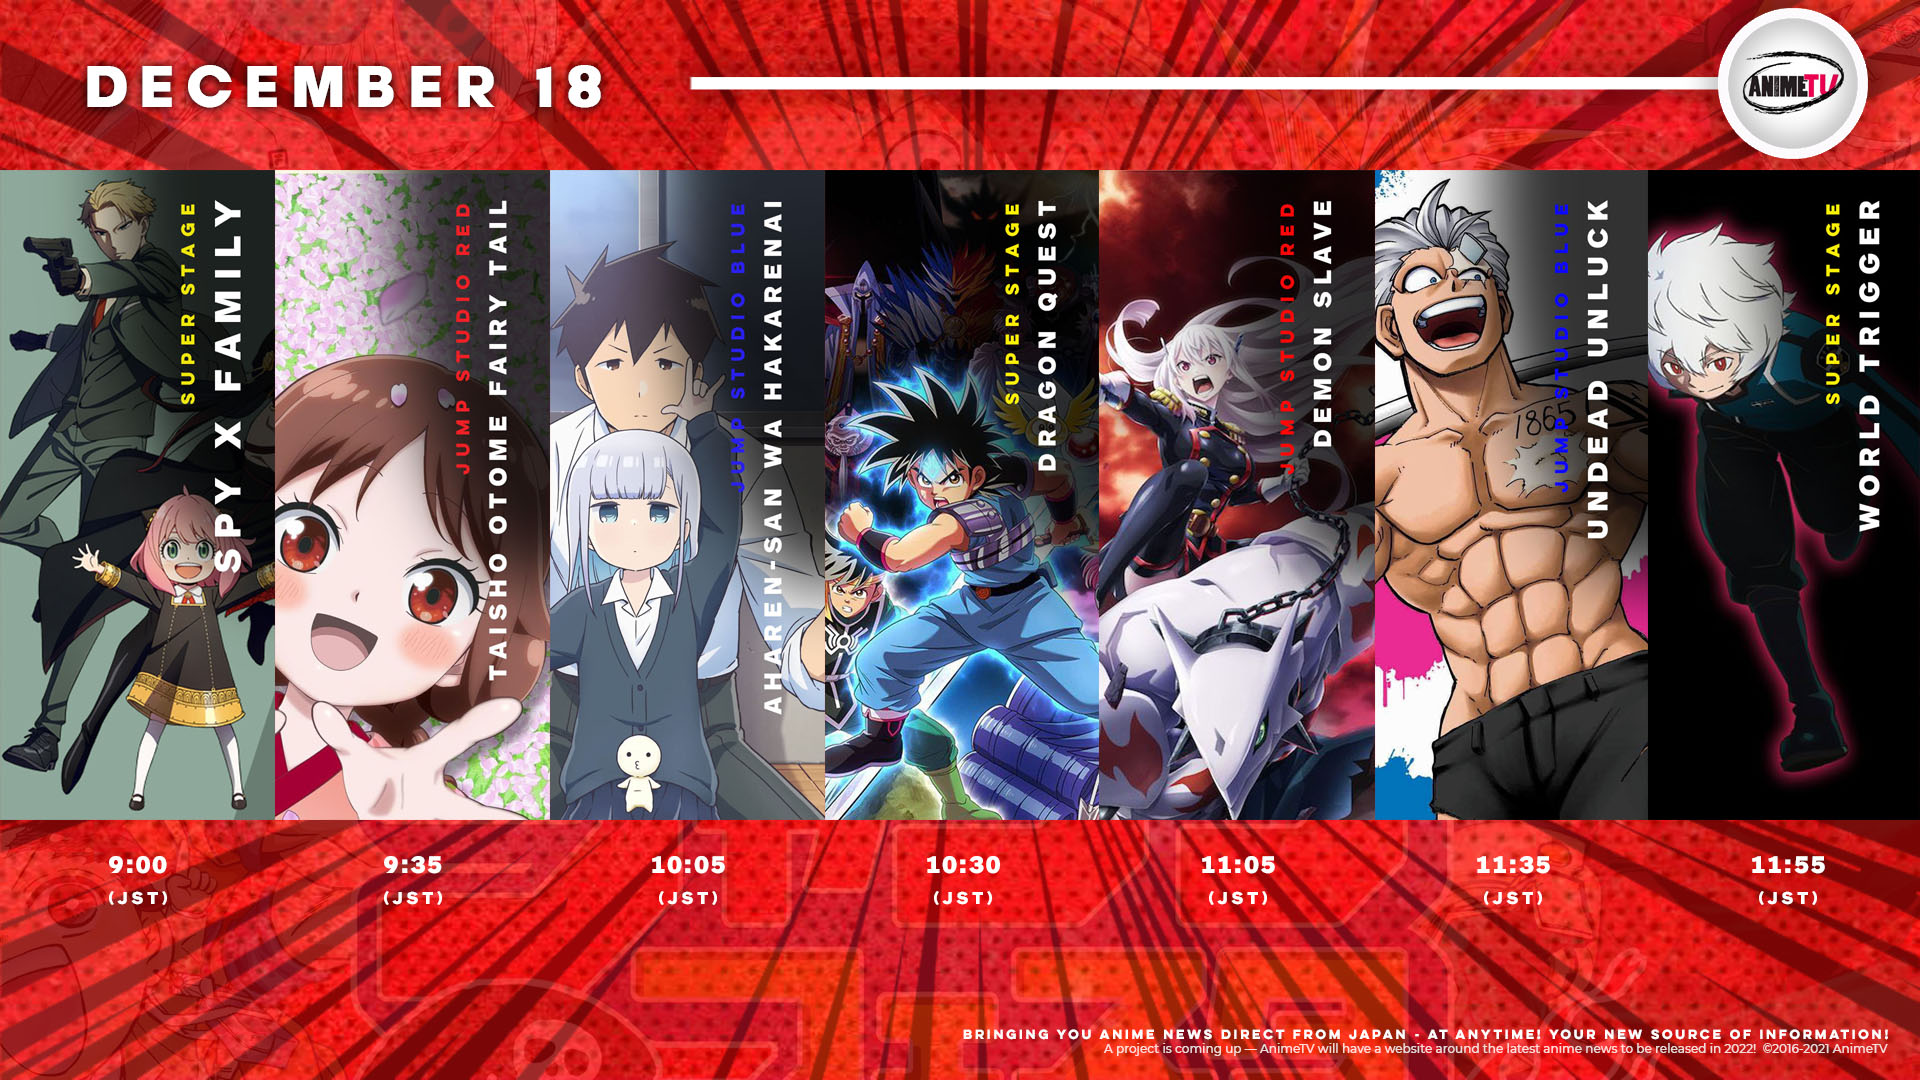 Jump Festa 2022 Schedule Animetv チェーン On Twitter: "【Full Schedule】 Jump Festa 2022 Scheduled For  December 18 To December 19! What Are You Most Looking Forward To Out Of Jump  Festa 2022? 😊 ✨More: Https://T.co/Ve3Cajwtri Https://T.co/Xxkg8Vhv9K" /